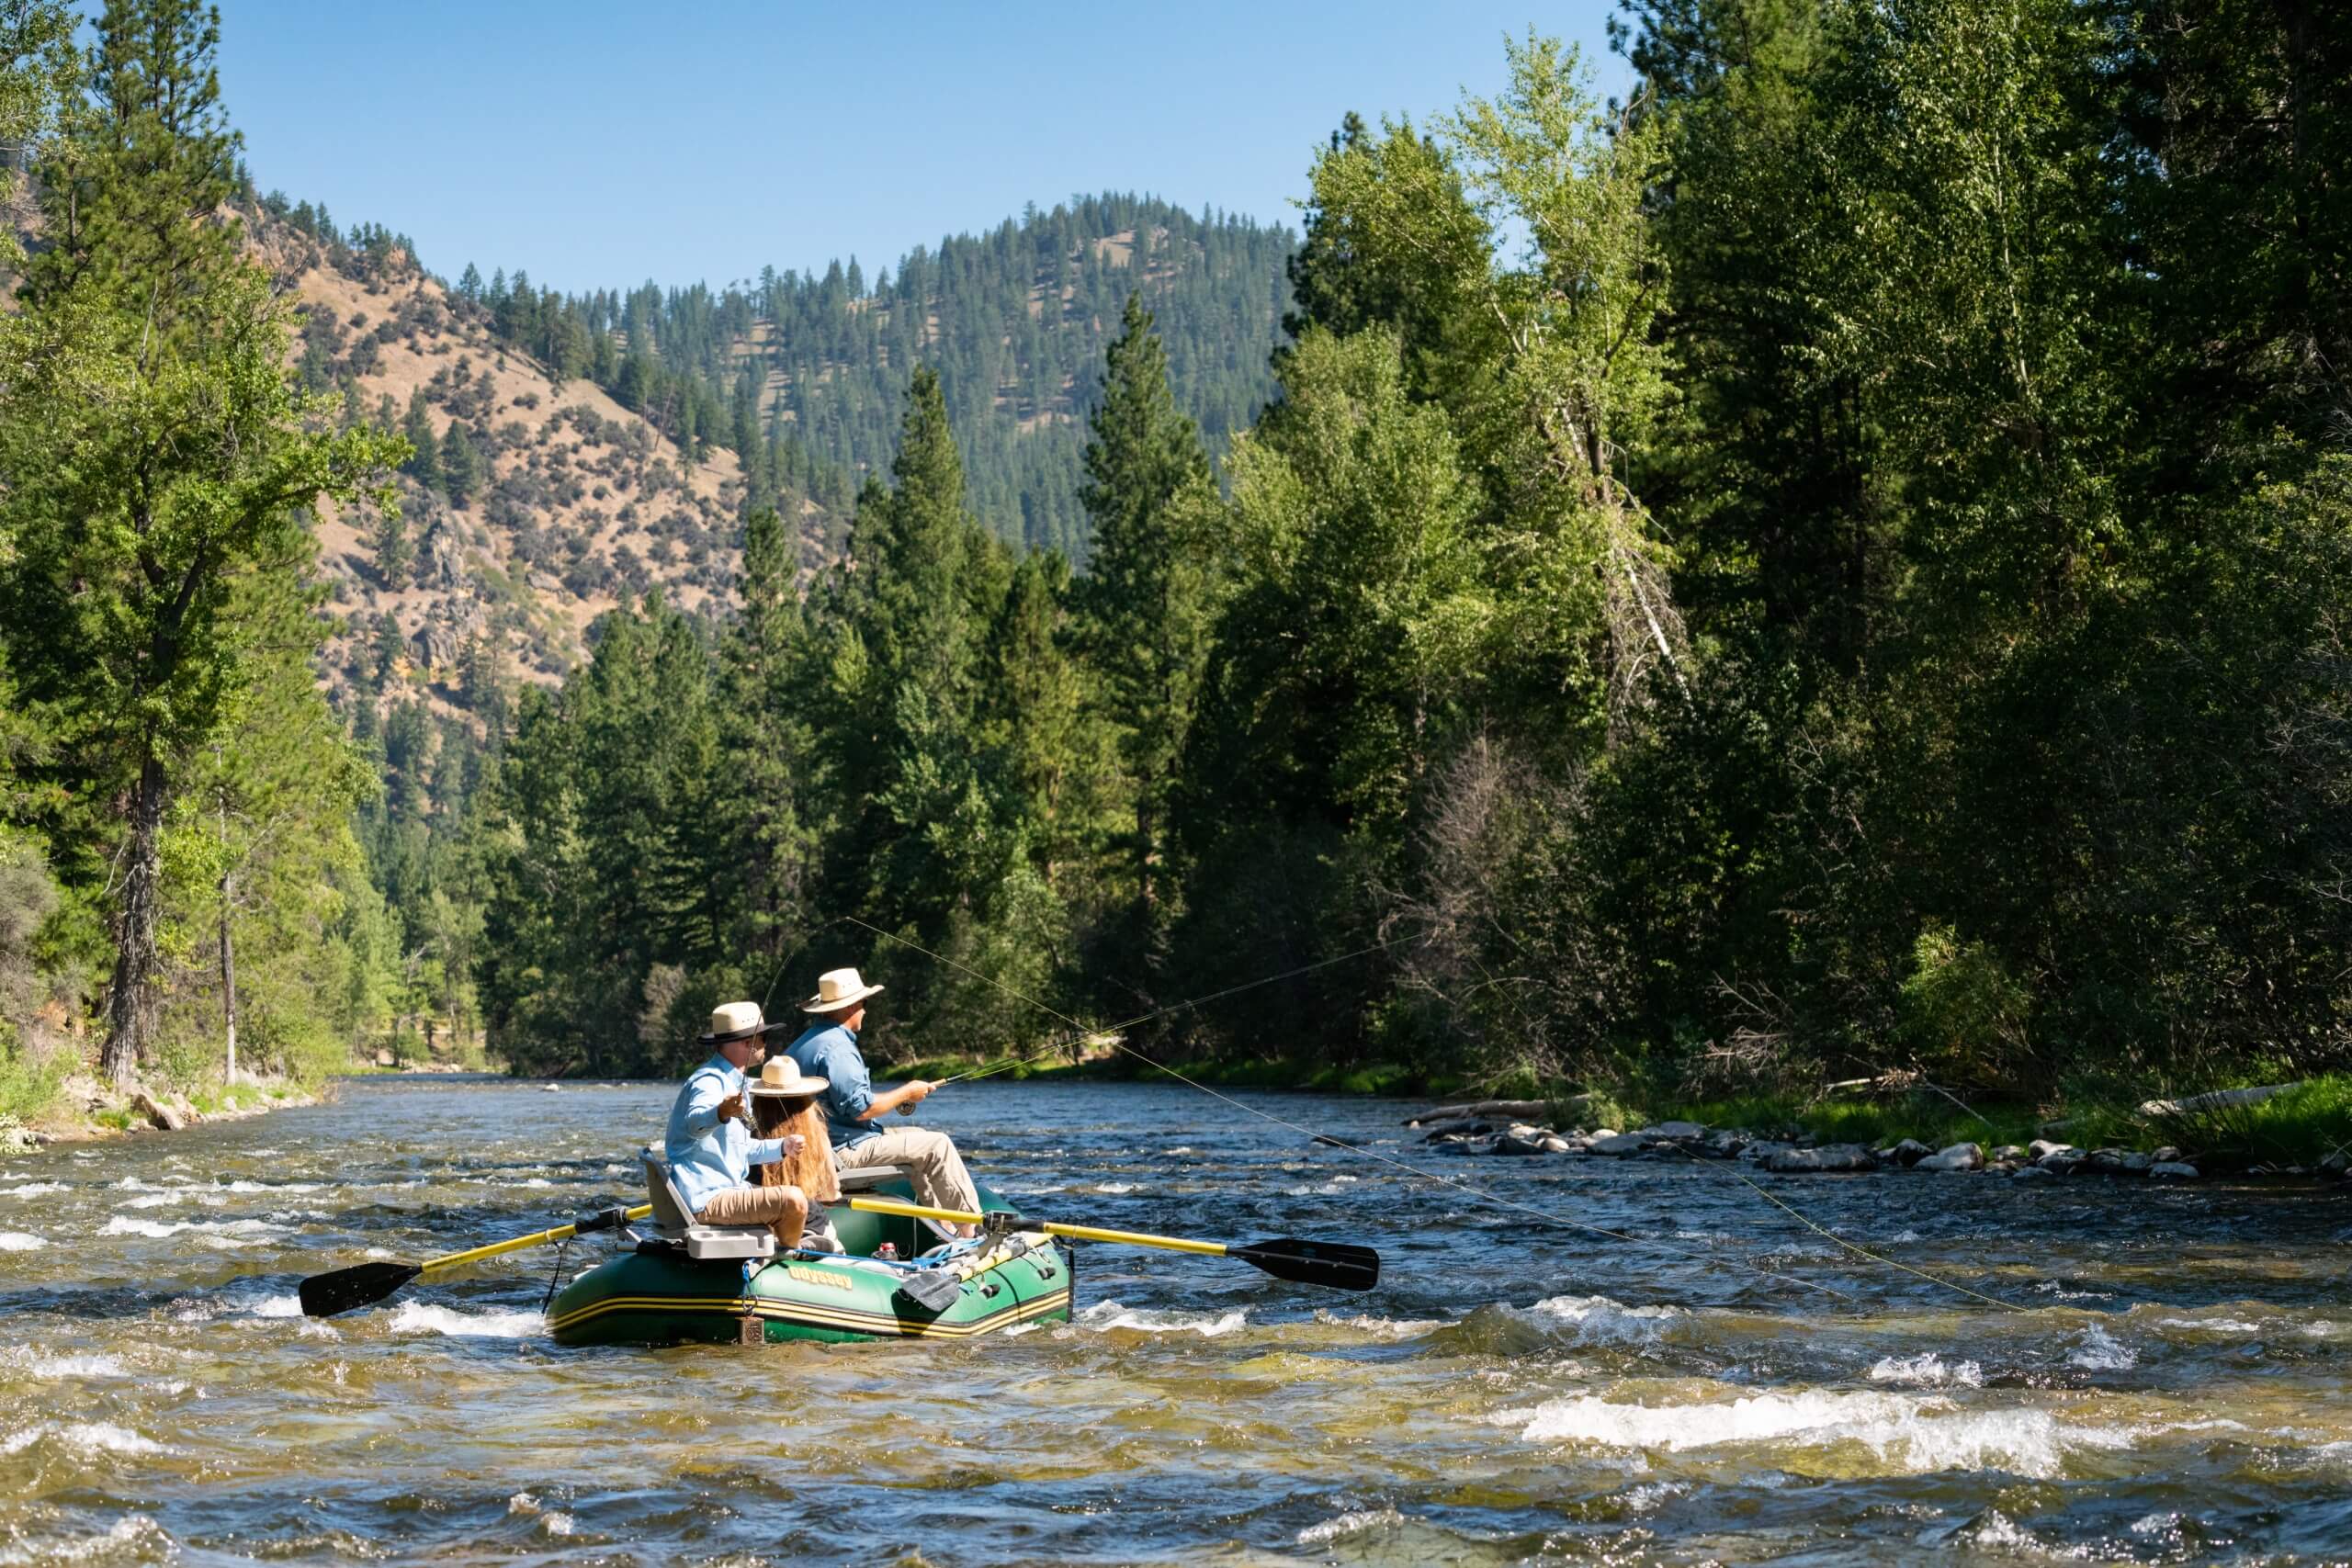 Guests Fly Fishing on the west fork river with the bitterroot mountains in the background.